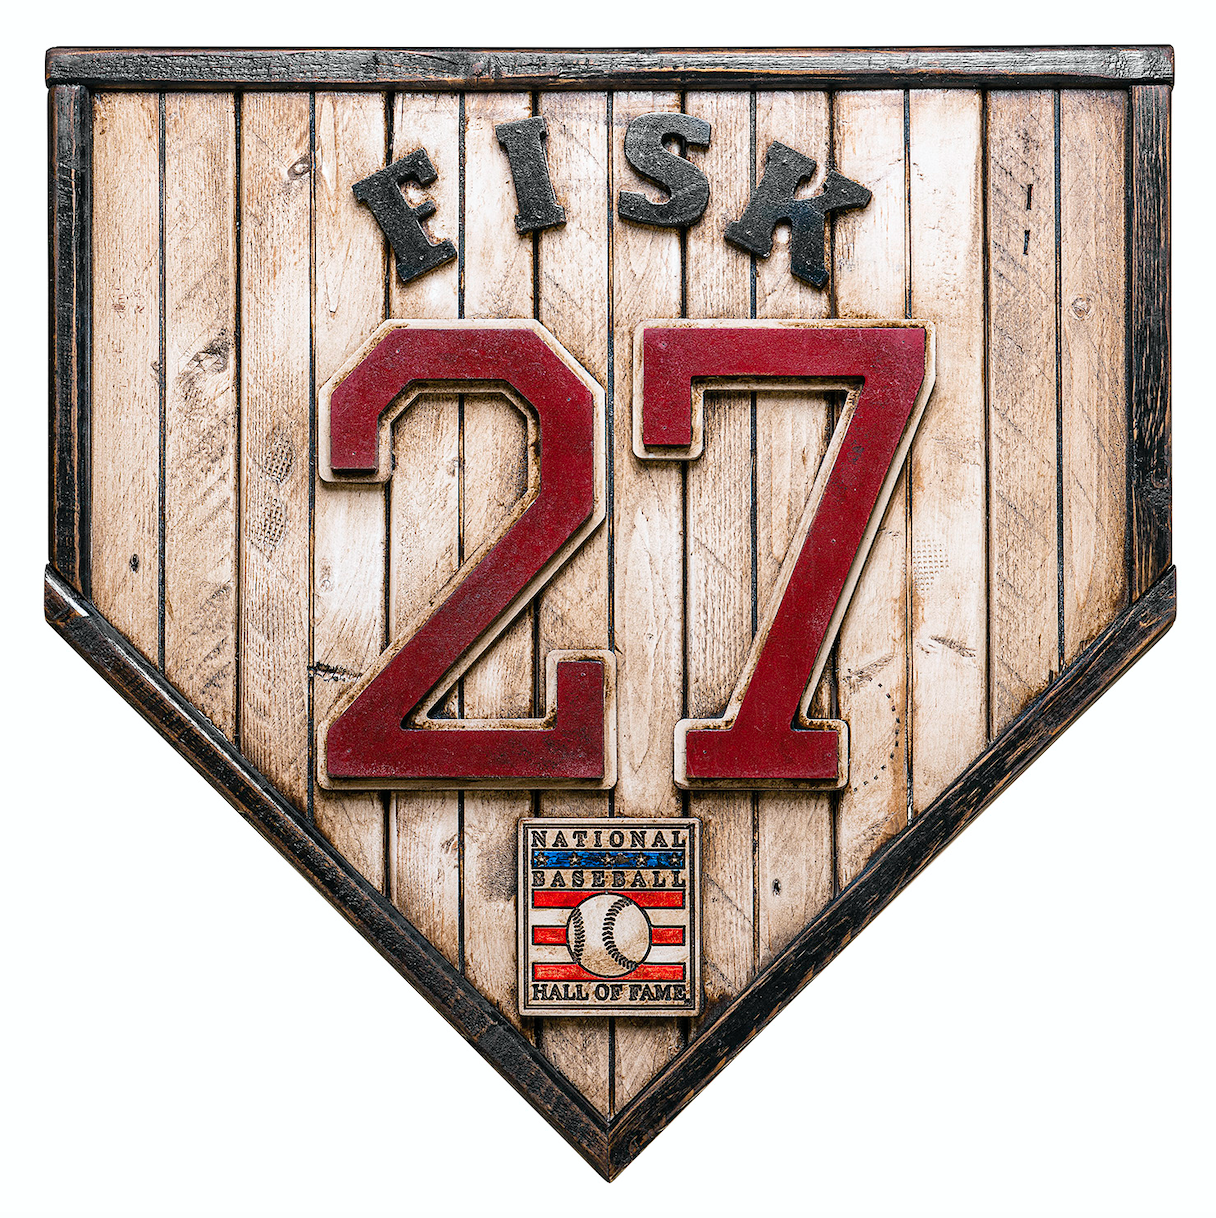 Handmade Hall Of Fame Legacy Red Sox Home Plate: Carlton Fisk #27